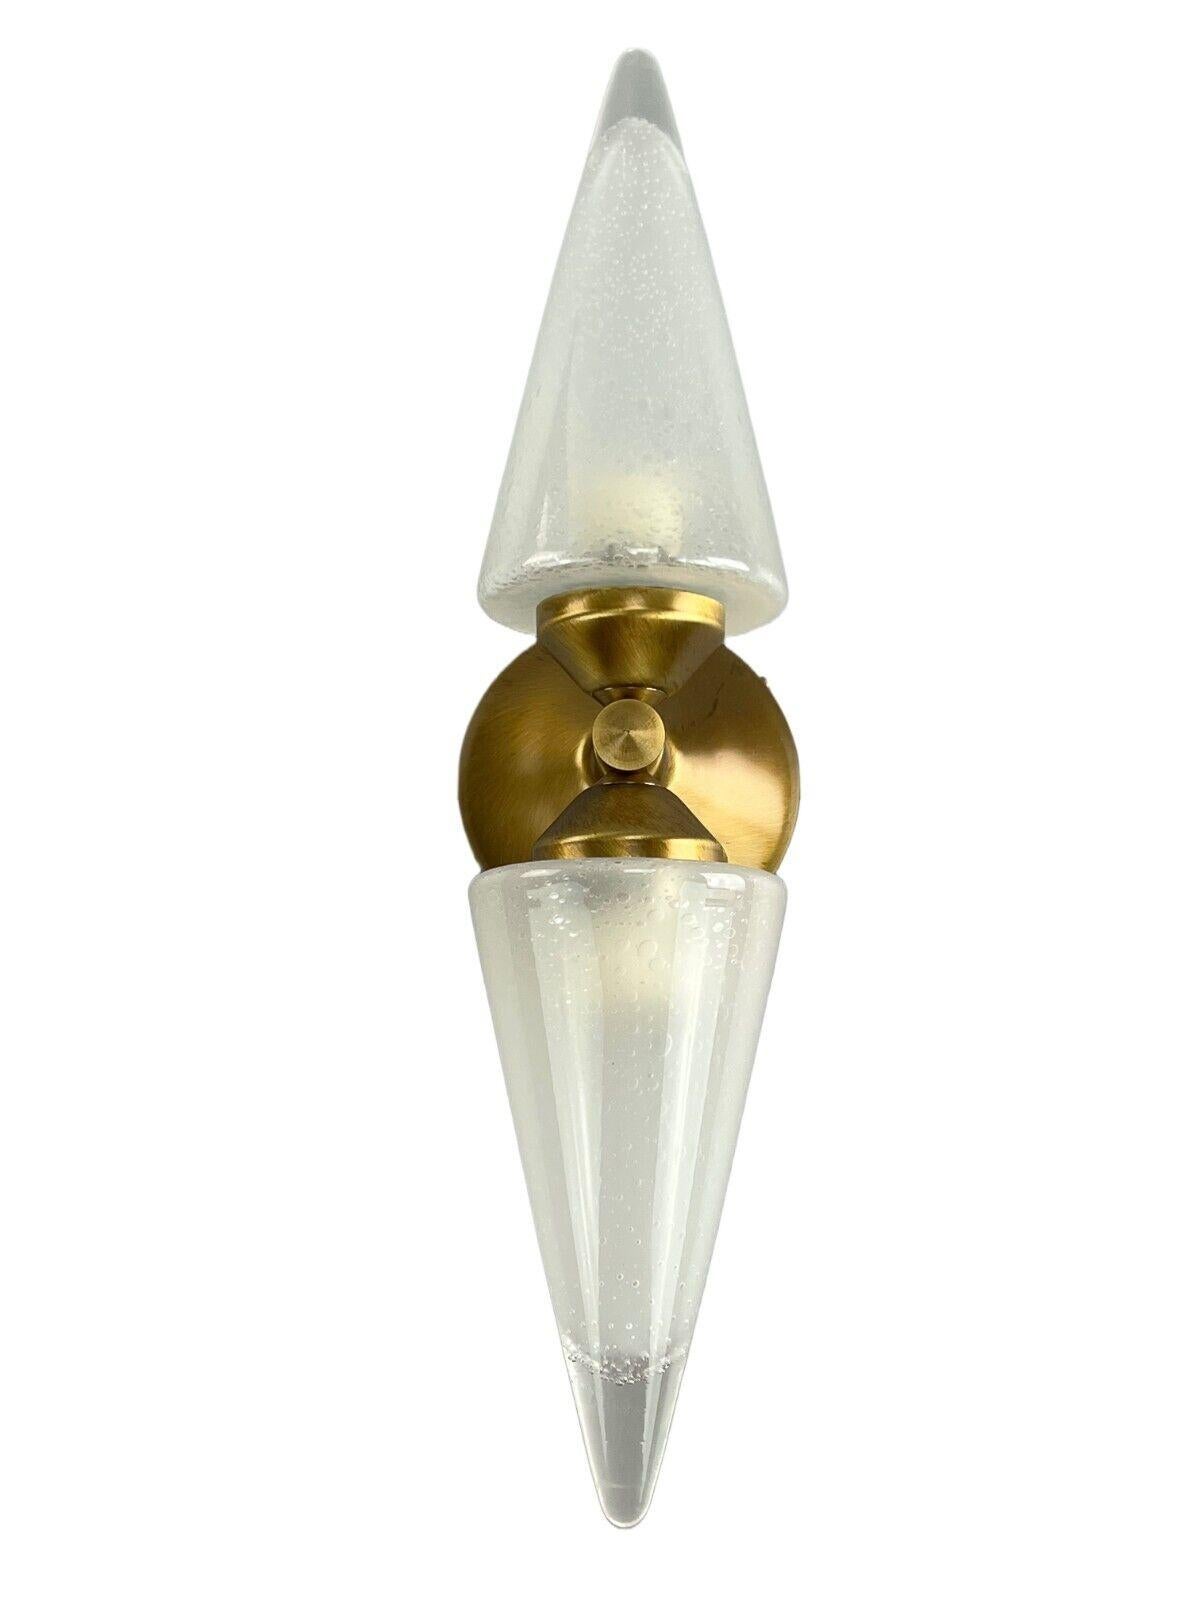 60s 70s Lamp light wall lamp wall sconce honsel glass Space Age Design

Object: wall lamp

Manufacturer: Honzel

Condition: good

Age: around 1960-1970

Dimensions:

Width = 11cm
Depth = 12.5cm
Height = 41cm

Other notes:

2x E14